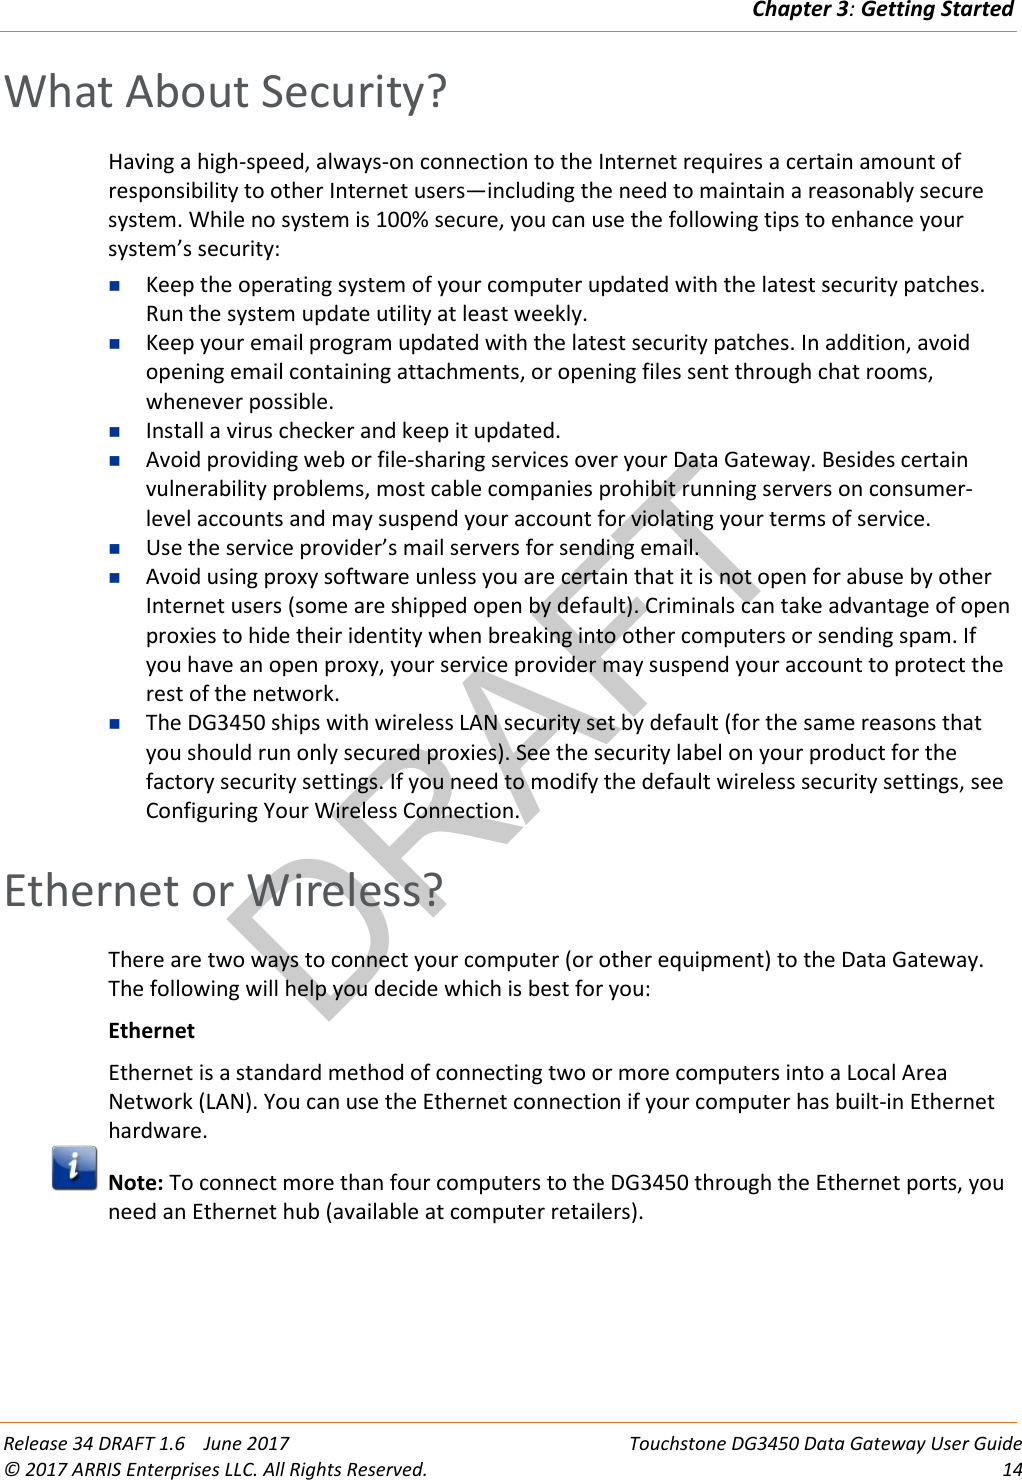 DRAFTChapter 3: Getting Started  Release 34 DRAFT 1.6    June 2017 Touchstone DG3450 Data Gateway User Guide © 2017 ARRIS Enterprises LLC. All Rights Reserved. 14  What About Security? Having a high-speed, always-on connection to the Internet requires a certain amount of responsibility to other Internet users—including the need to maintain a reasonably secure system. While no system is 100% secure, you can use the following tips to enhance your system’s security:  Keep the operating system of your computer updated with the latest security patches. Run the system update utility at least weekly.  Keep your email program updated with the latest security patches. In addition, avoid opening email containing attachments, or opening files sent through chat rooms, whenever possible.  Install a virus checker and keep it updated.  Avoid providing web or file-sharing services over your Data Gateway. Besides certain vulnerability problems, most cable companies prohibit running servers on consumer-level accounts and may suspend your account for violating your terms of service.  Use the service provider’s mail servers for sending email.  Avoid using proxy software unless you are certain that it is not open for abuse by other Internet users (some are shipped open by default). Criminals can take advantage of open proxies to hide their identity when breaking into other computers or sending spam. If you have an open proxy, your service provider may suspend your account to protect the rest of the network.  The DG3450 ships with wireless LAN security set by default (for the same reasons that you should run only secured proxies). See the security label on your product for the factory security settings. If you need to modify the default wireless security settings, see Configuring Your Wireless Connection.   Ethernet or Wireless? There are two ways to connect your computer (or other equipment) to the Data Gateway. The following will help you decide which is best for you: Ethernet Ethernet is a standard method of connecting two or more computers into a Local Area Network (LAN). You can use the Ethernet connection if your computer has built-in Ethernet hardware.  Note: To connect more than four computers to the DG3450 through the Ethernet ports, you need an Ethernet hub (available at computer retailers). 